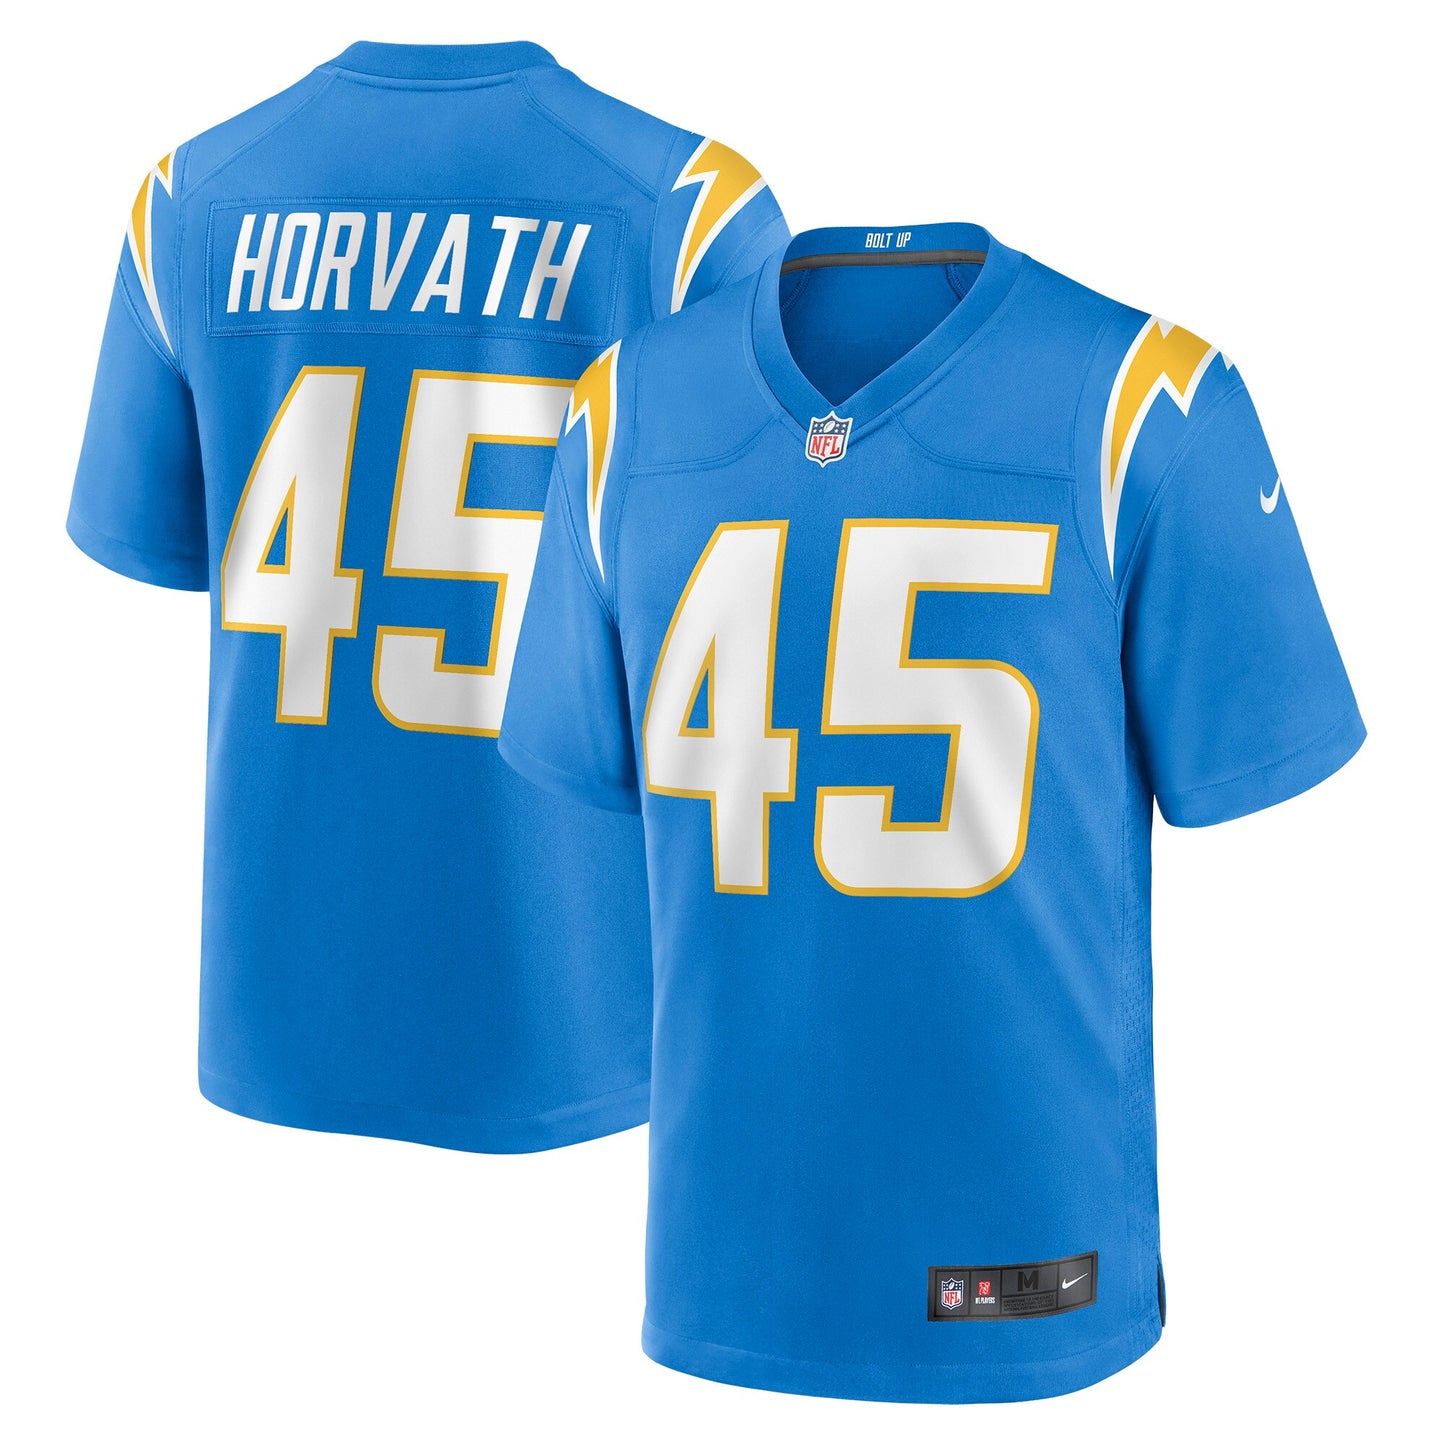 Zander Horvath Los Angeles Chargers Nike Game Jersey - Powder Blue